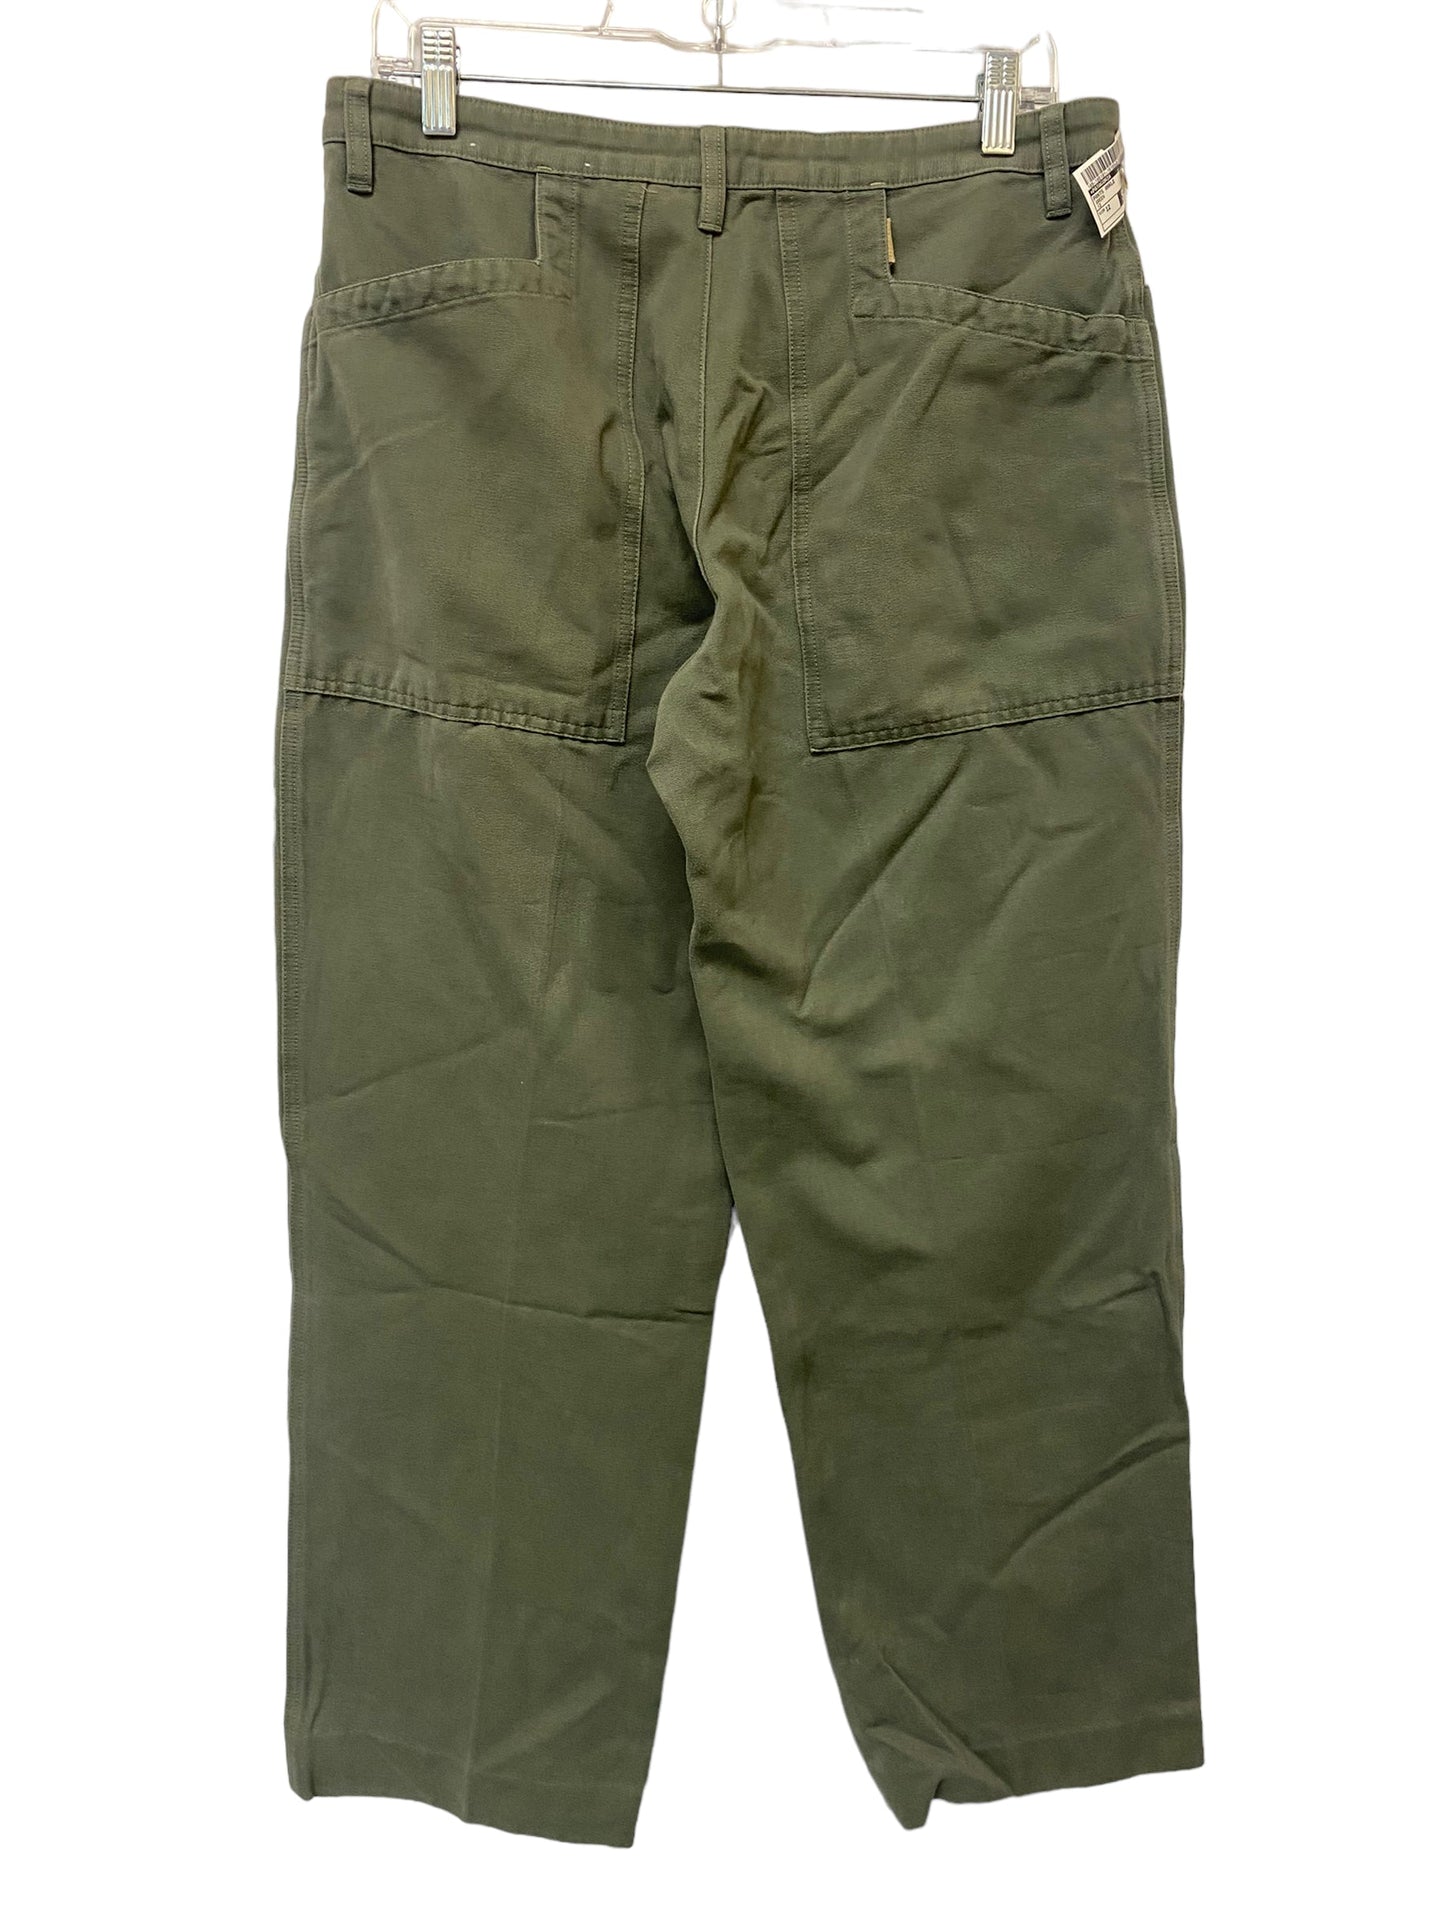 Pants Ankle By Patagonia  Size: 12